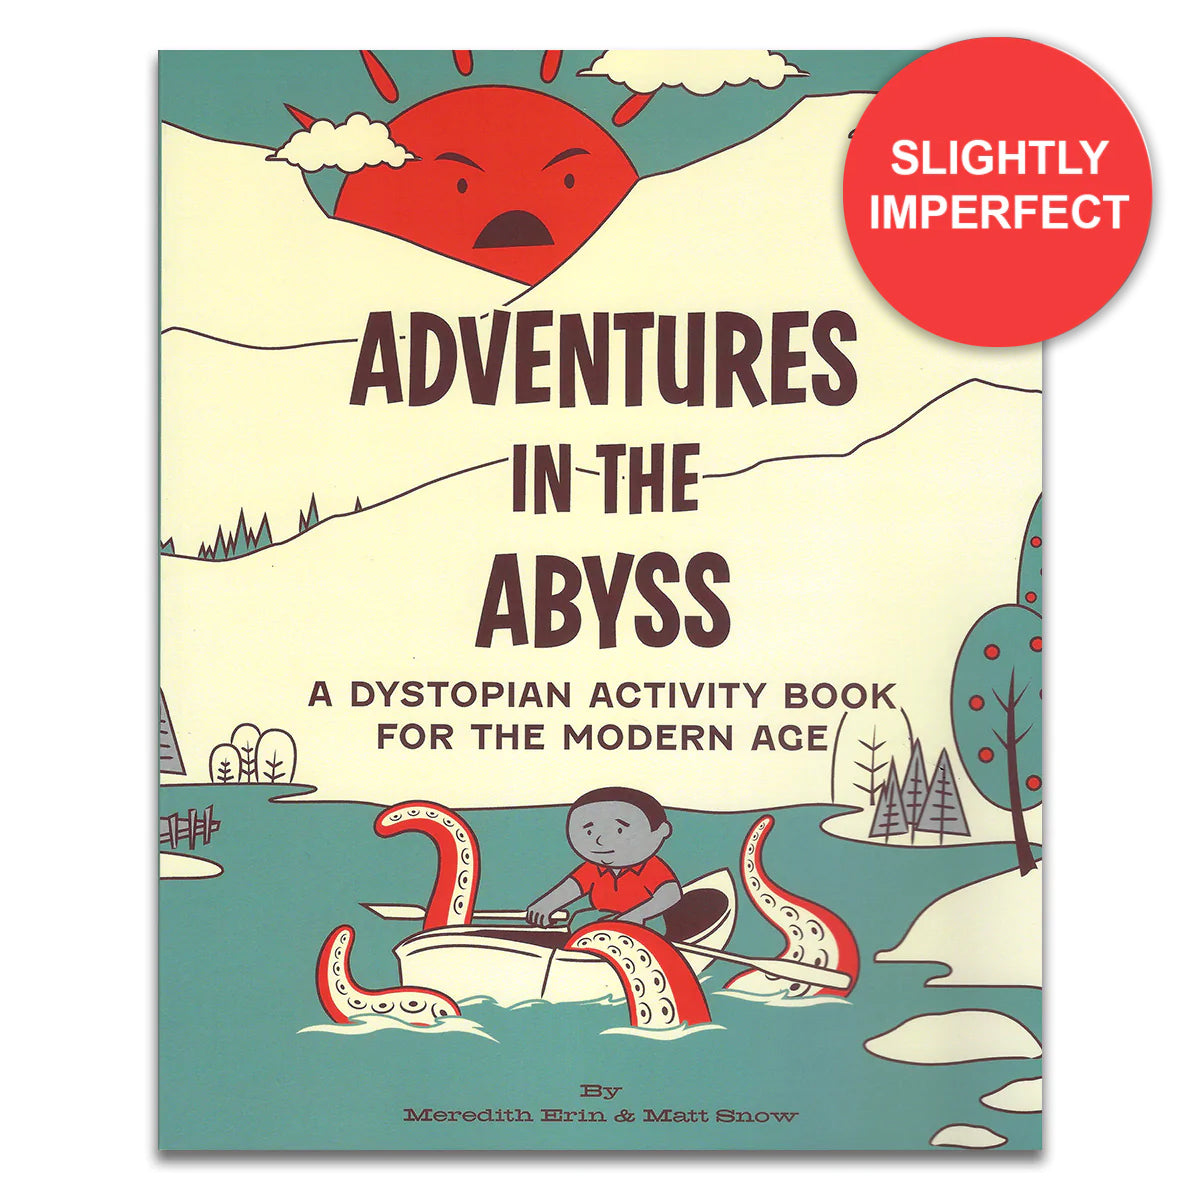 Slightly Imperfect Adventures in the Abyss: A Dystopian Activity Book For The Modern Age